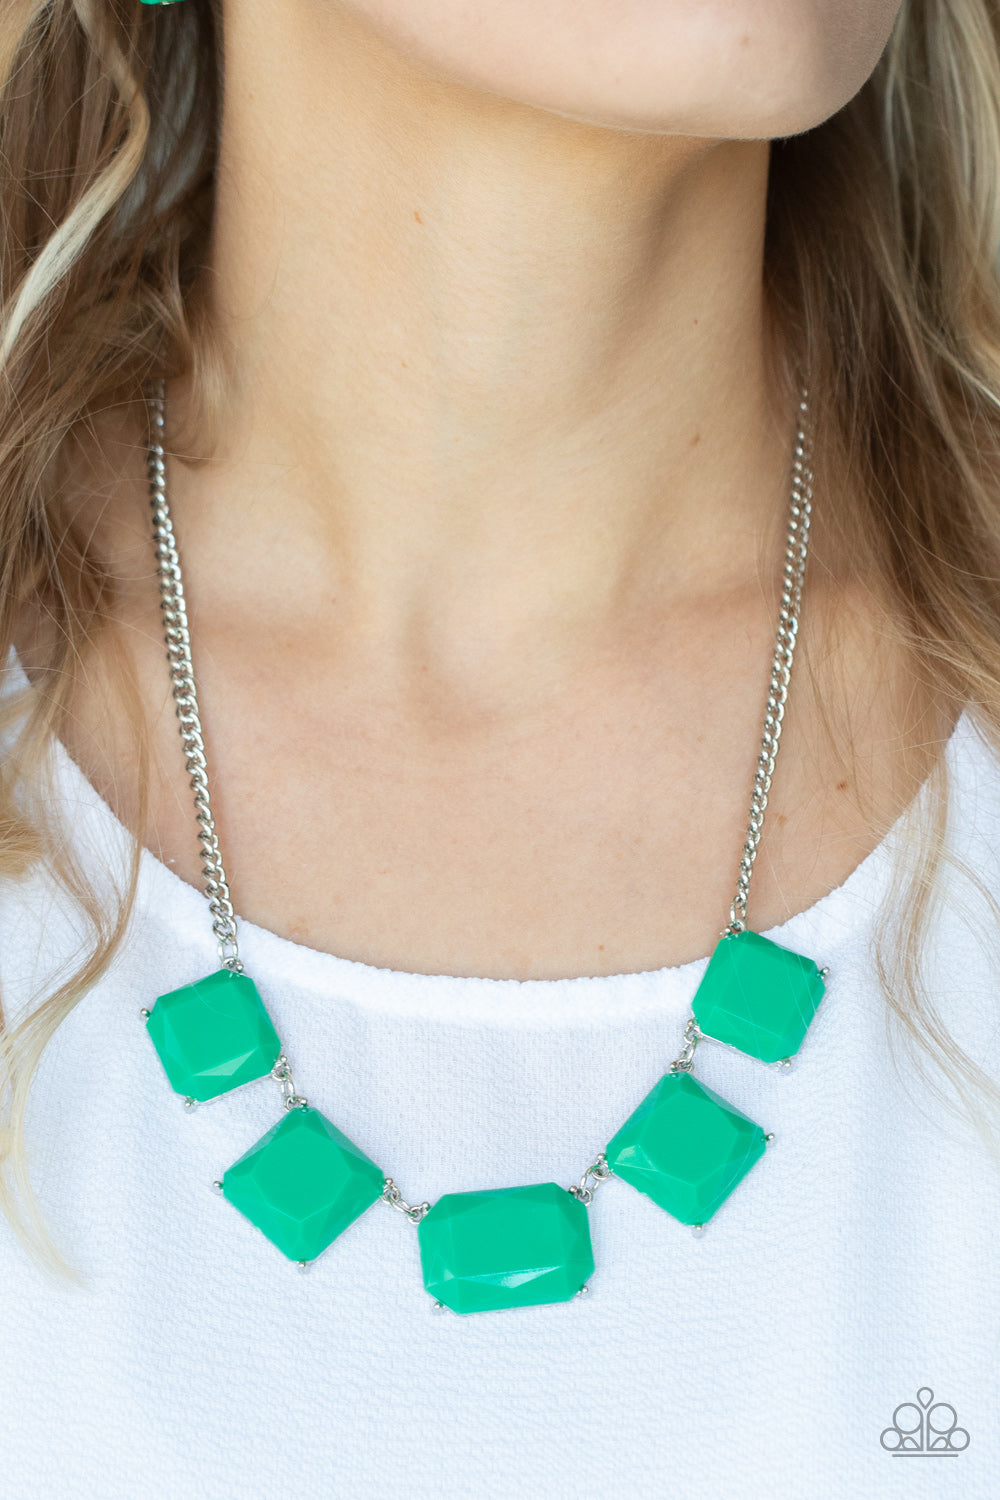 PRE-ORDER - Paparazzi Instant Mood Booster - Green - Necklace & Earrings - $5 Jewelry with Ashley Swint